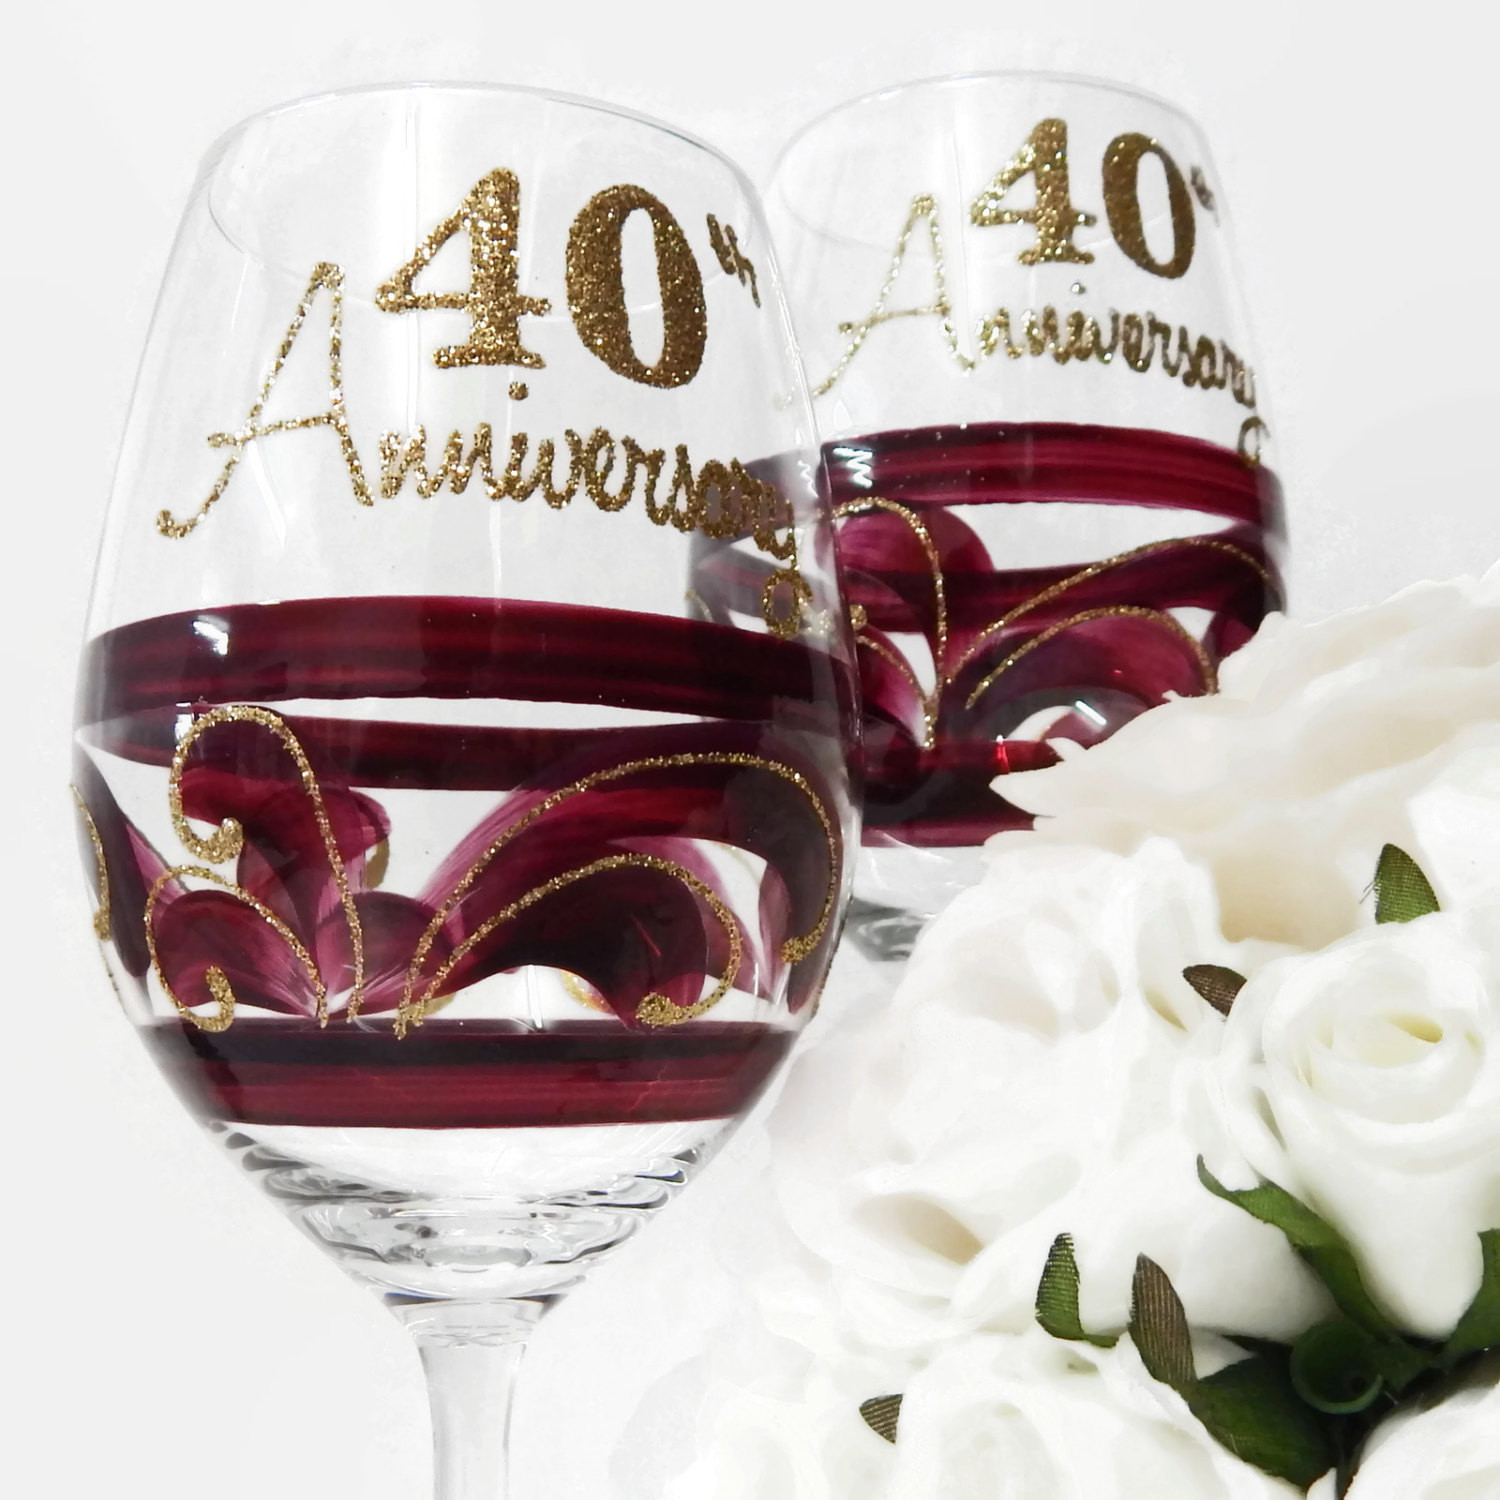 Gift Ideas For 40Th Wedding Anniversary
 Sale 40th Wedding Anniversary Gift by InaSpinNiquesWay